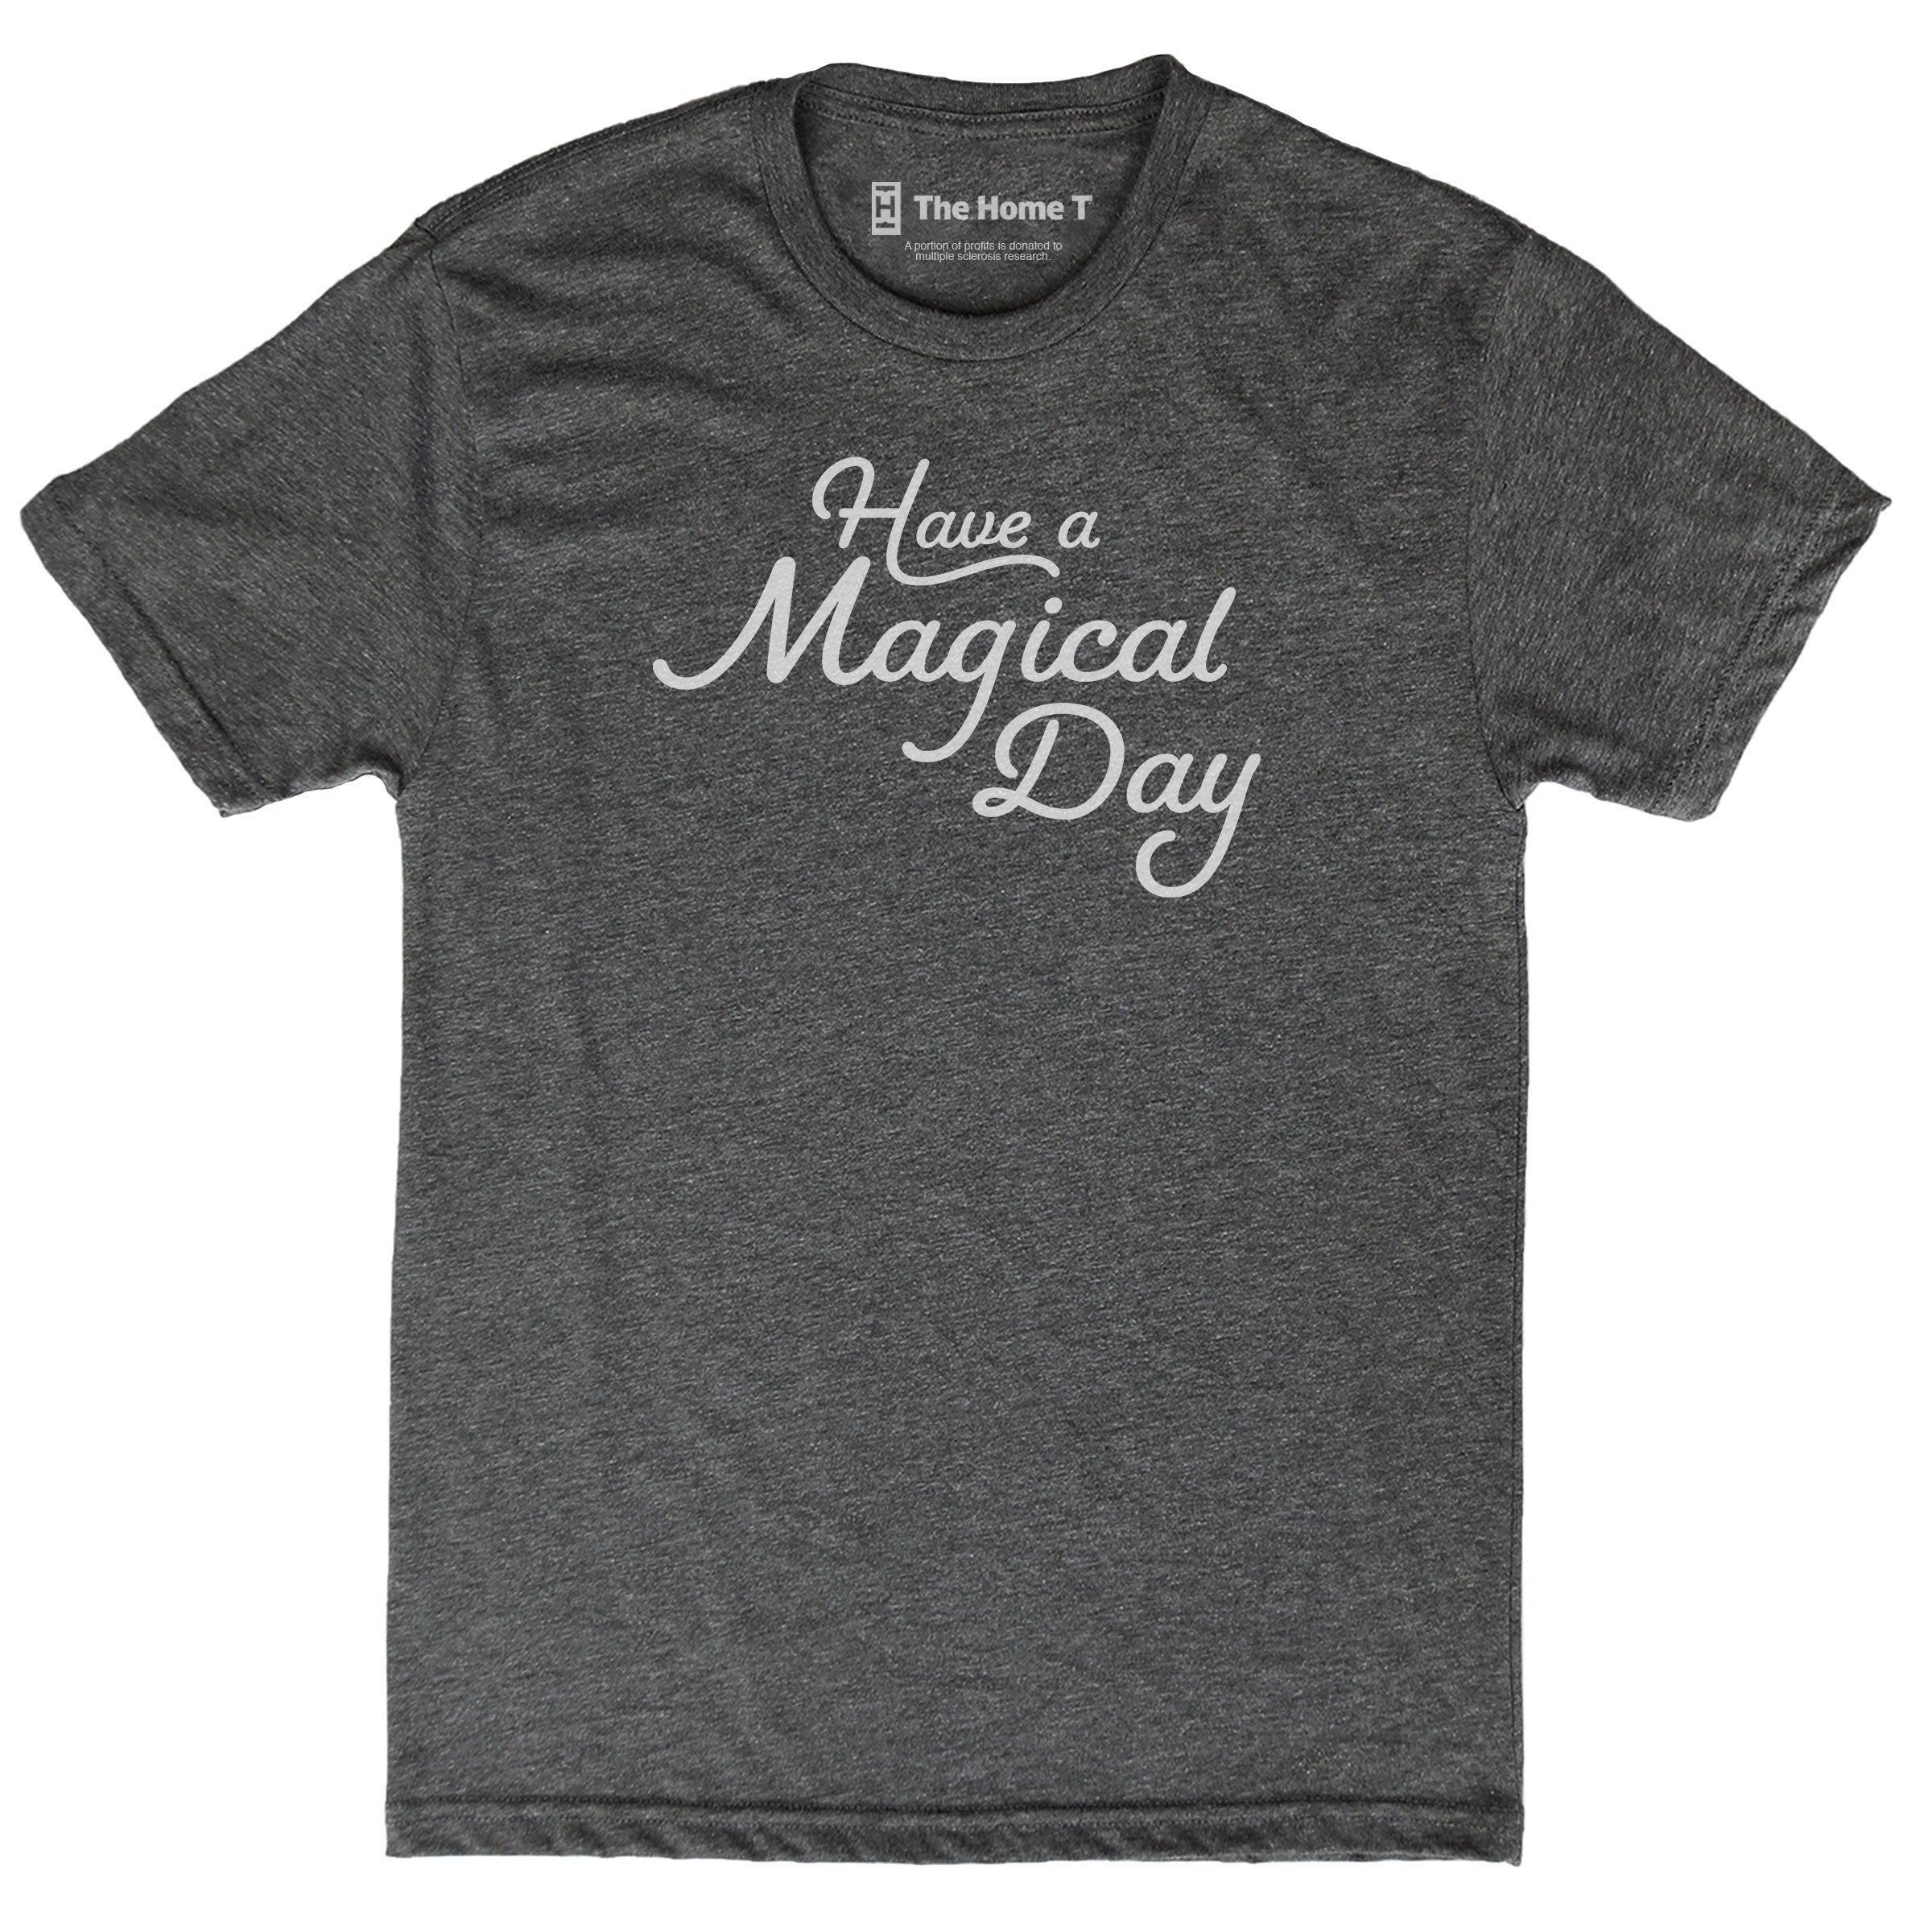 Have a Magical Day The Home T